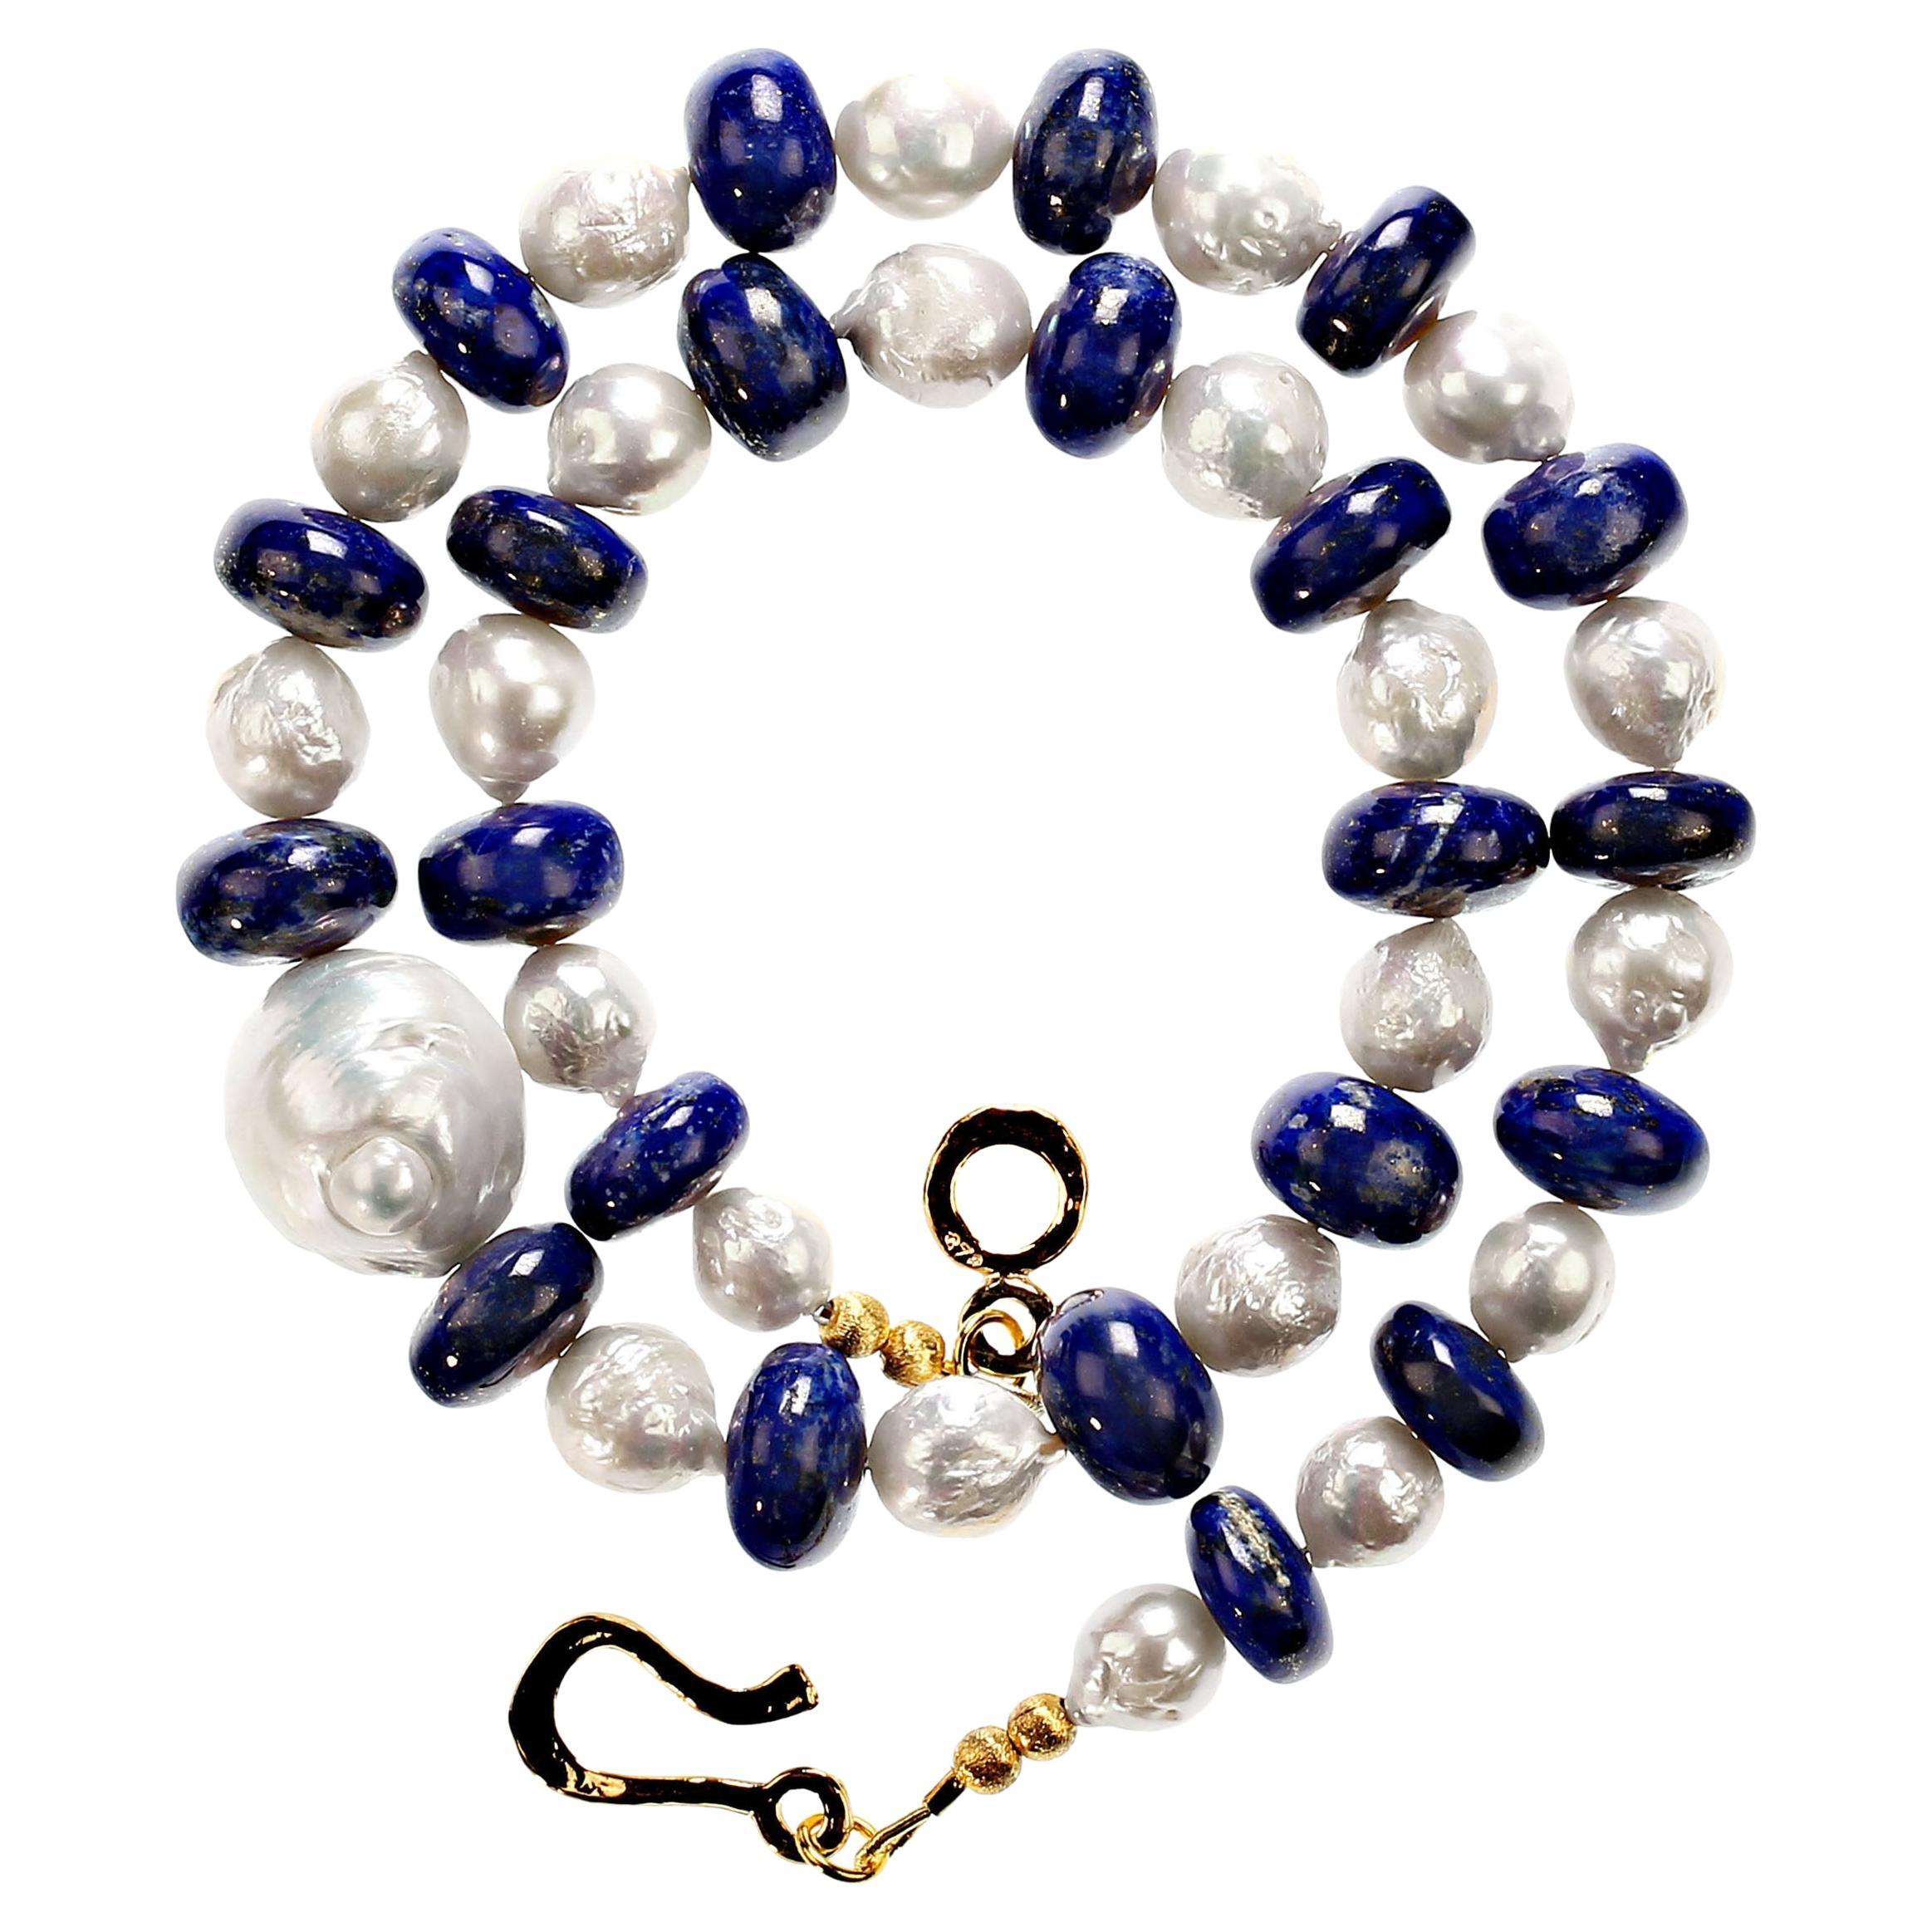 Artisan AJD Elegant White Pearl and Blue Lapis Lazuli 20 Inch Necklace For Sale